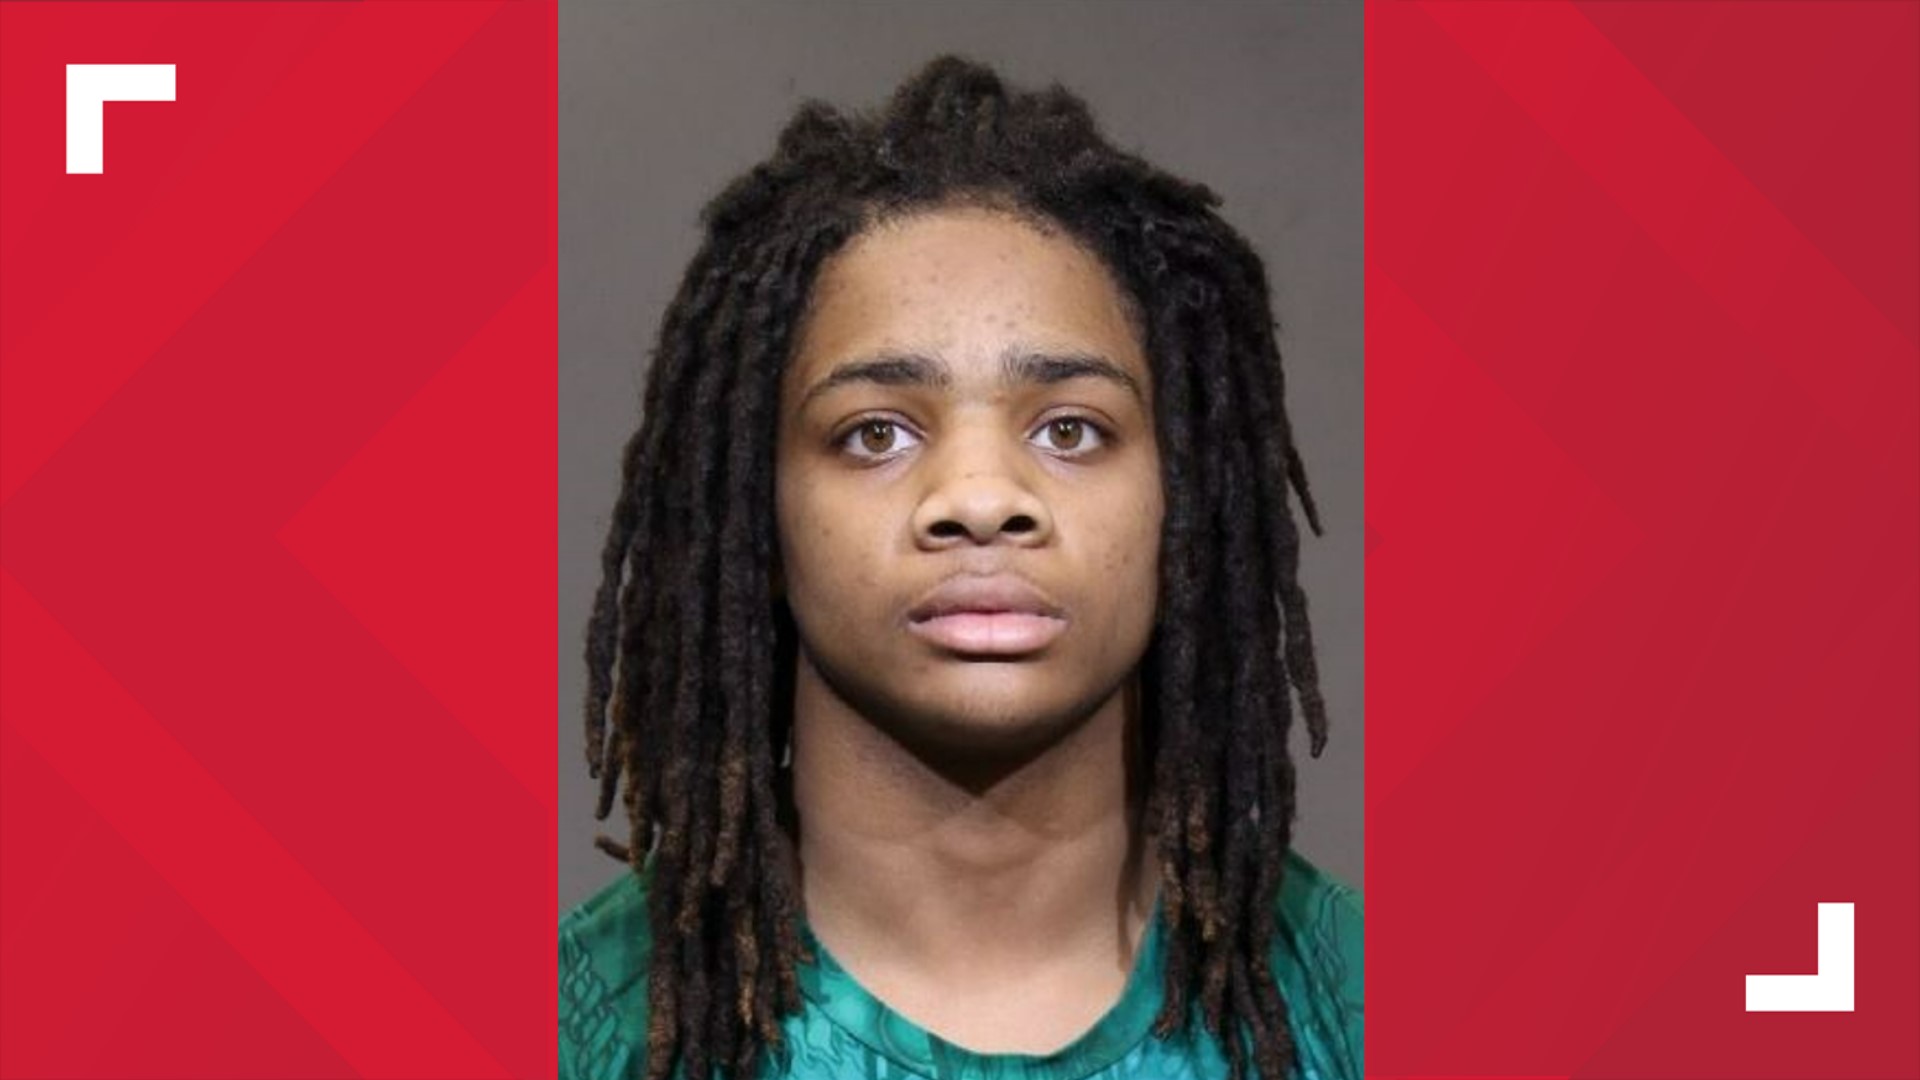 Kyrim Curenton was taken into custody after police executed a search warrant in the area of Cleveland and East 17th avenues Wednesday afternoon.